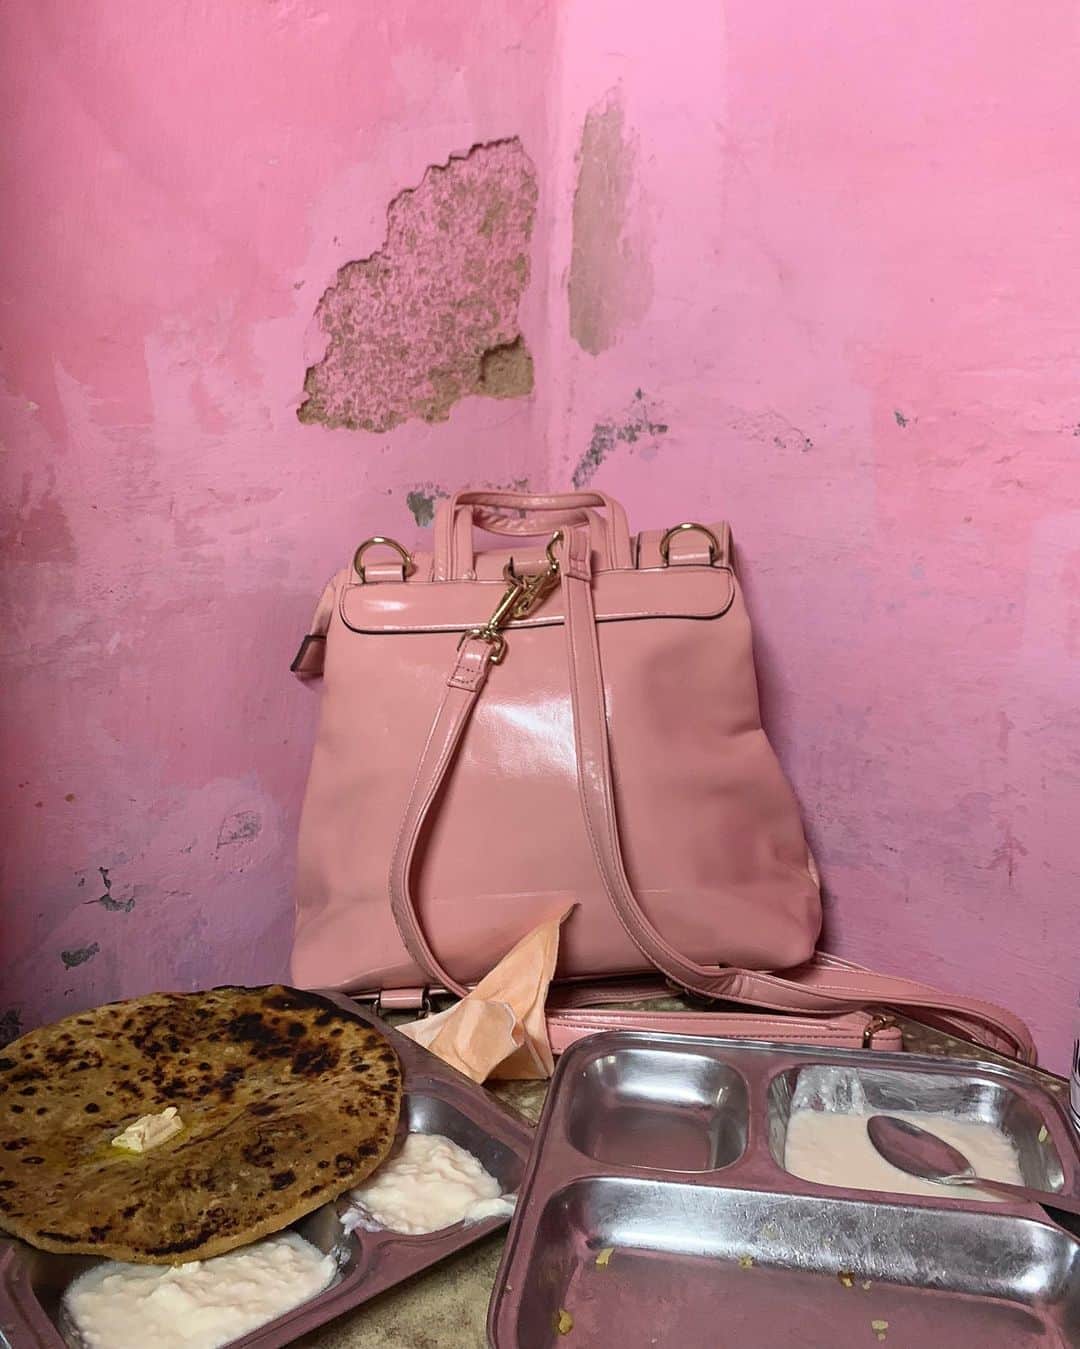 ジョン・スタンメイヤーさんのインスタグラム写真 - (ジョン・スタンメイヤーInstagram)「A tale of unusual connected moments, told through the narrative of bags scattered across India. On my third day, in the corner of a dhaba in Amritsar, Punjab, slightly more than a paper airplane toss from the Golden Temple, was a bag on the table. The soft spoken lady who sat next to us asked if we'd watch over her pinkish mauve bag while she used a nearby bathroom. Never did she realized how beautiful it was against a pink wall behind her not so beautiful uneaten food… A young girl's purple school bag in a classroom of science in Dhubri, Assam. She left it resting in front of a wall mural, reminding us that under our skin, we are all the same… And a locker at a garment factory located in the middle of nowhere Benganur, in the southern state of Karnataka, overflowing with purple and pink handbags. The wonderful ladies who own these colors sew clothing you're likely wearing from the Gap, Columbia and H&M, earn just 323 Rupees (USD 4.40) per day. Everything around us has a story, connecting all of us. ⠀⠀⠀⠀⠀⠀⠀ India’s Daunting Challenge: There’s Water Everywhere, And Nowhere - Chapter 8 of the @outofedenwalk, my latest story in the August 2020 of @natgeo magazine. ⠀⠀⠀⠀⠀⠀⠀ #triptych #nothingspecial #bags #handbags #purple #pink #mauve #wasterfood #schoolbag #biology #intestins #locker #garmentfactory #amritsar #punjab #dhubri #assam #benganur #karnataka #peace #love #india @natgeo @outofedenwalk #walkingindia #edenwalk」10月15日 11時49分 - johnstanmeyer